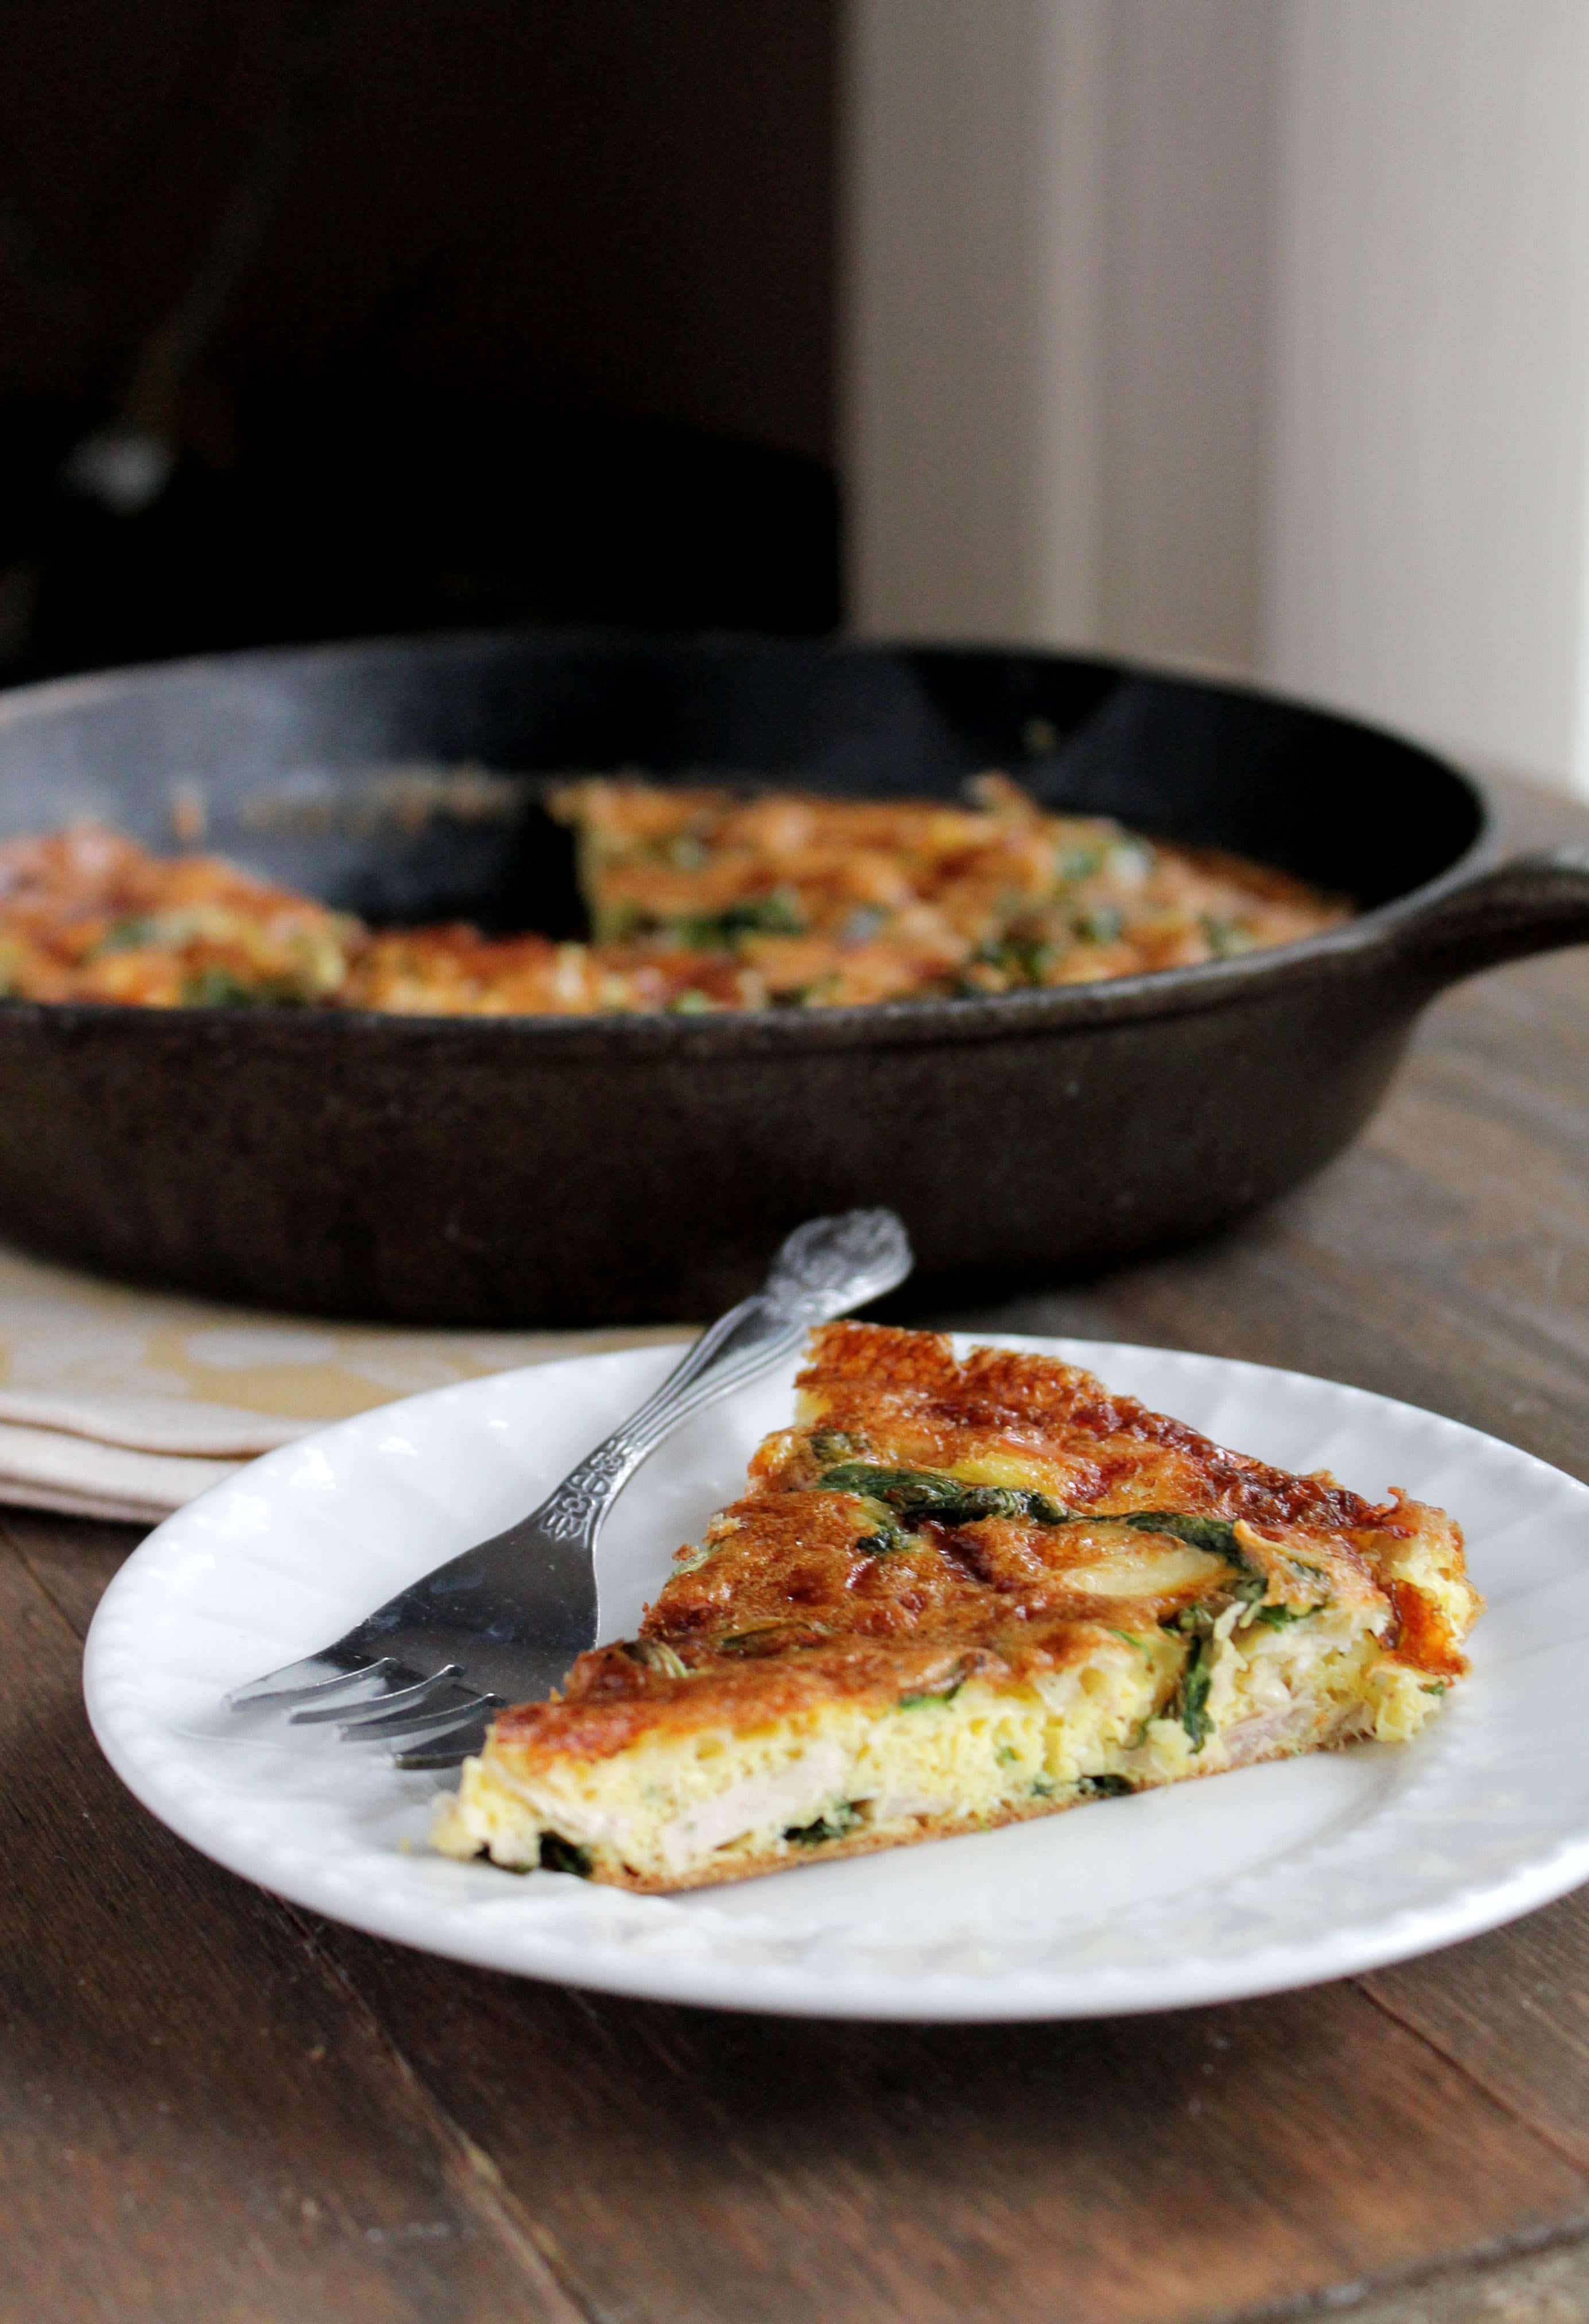 A slice of turkey frittata filled with spinach and mozzarella cheese on a plate, with the skillet in the background